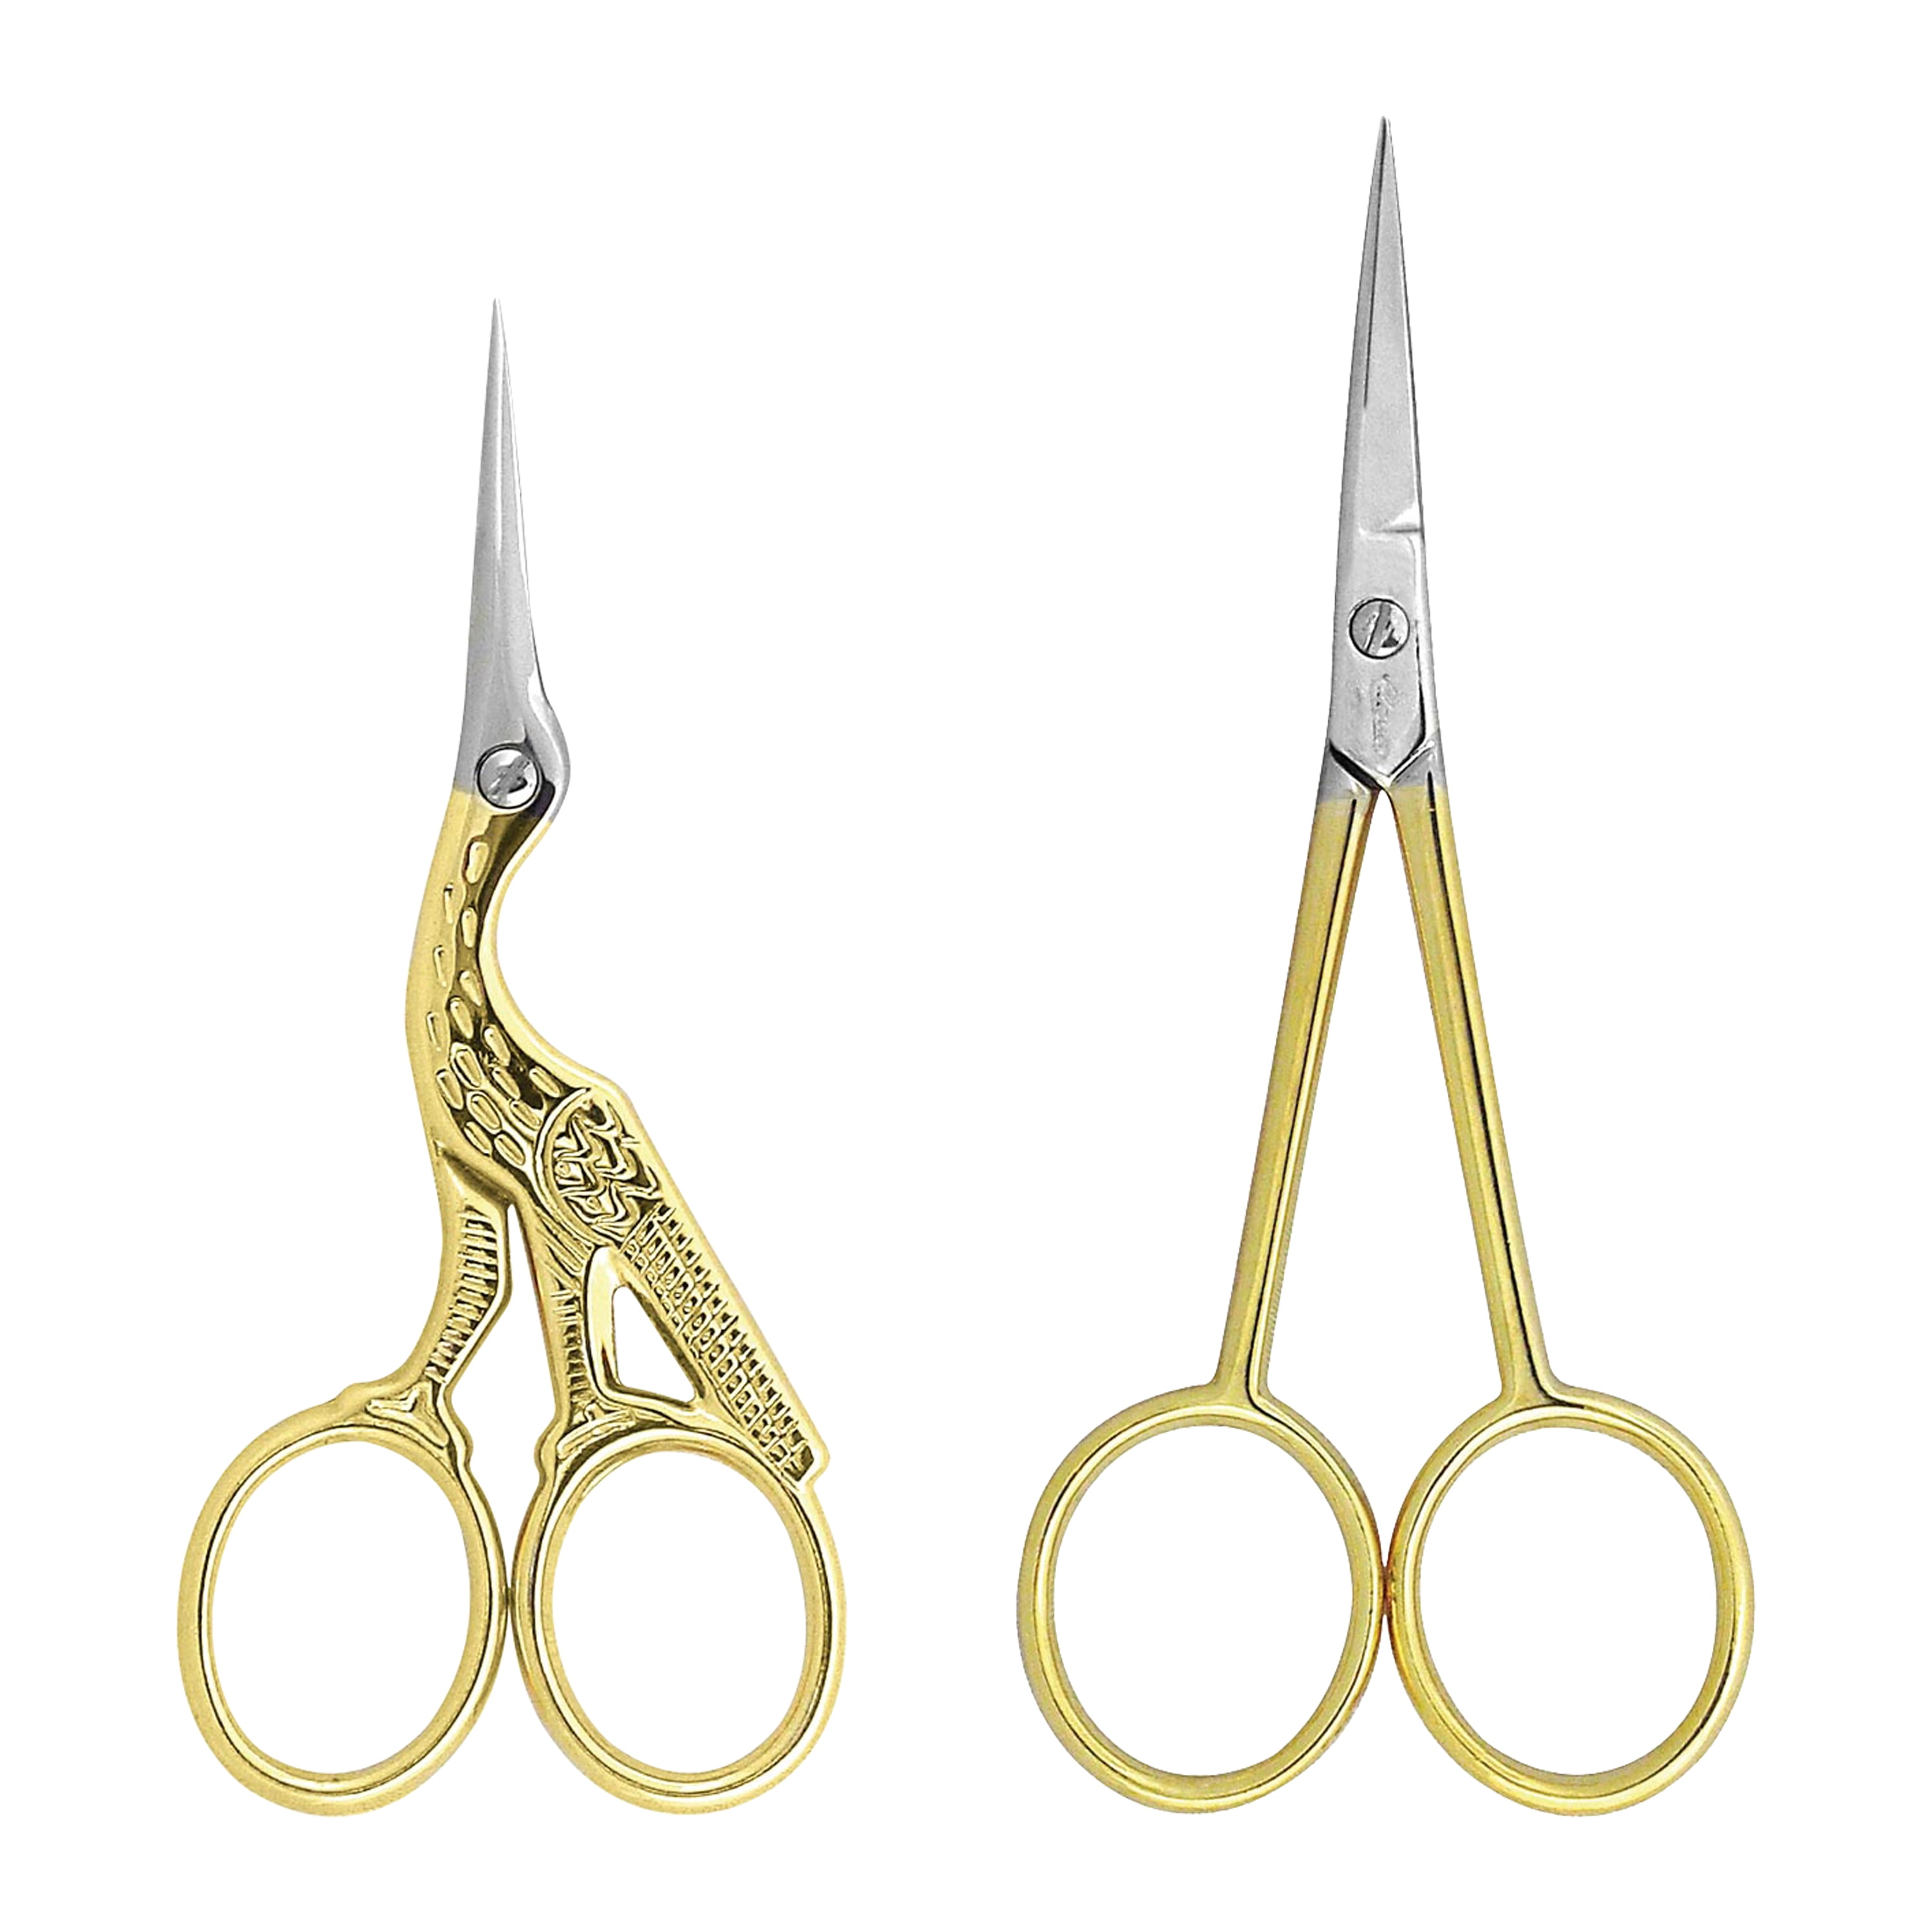 4-1/8 Sewing and Embroidery Scissors